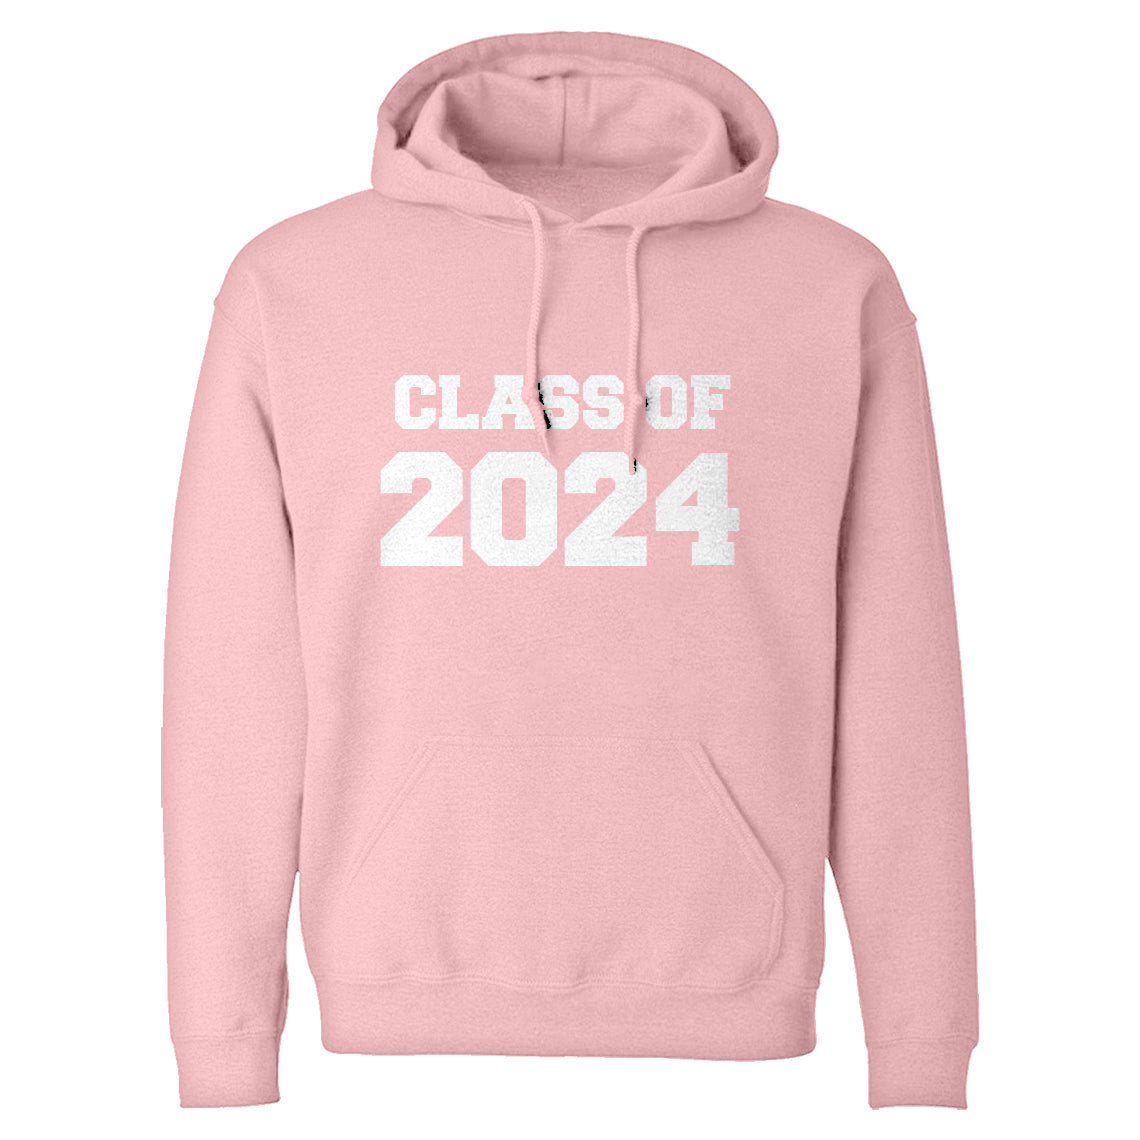 Class of 2024 Unisex Adult Hoodie Indica Plateau